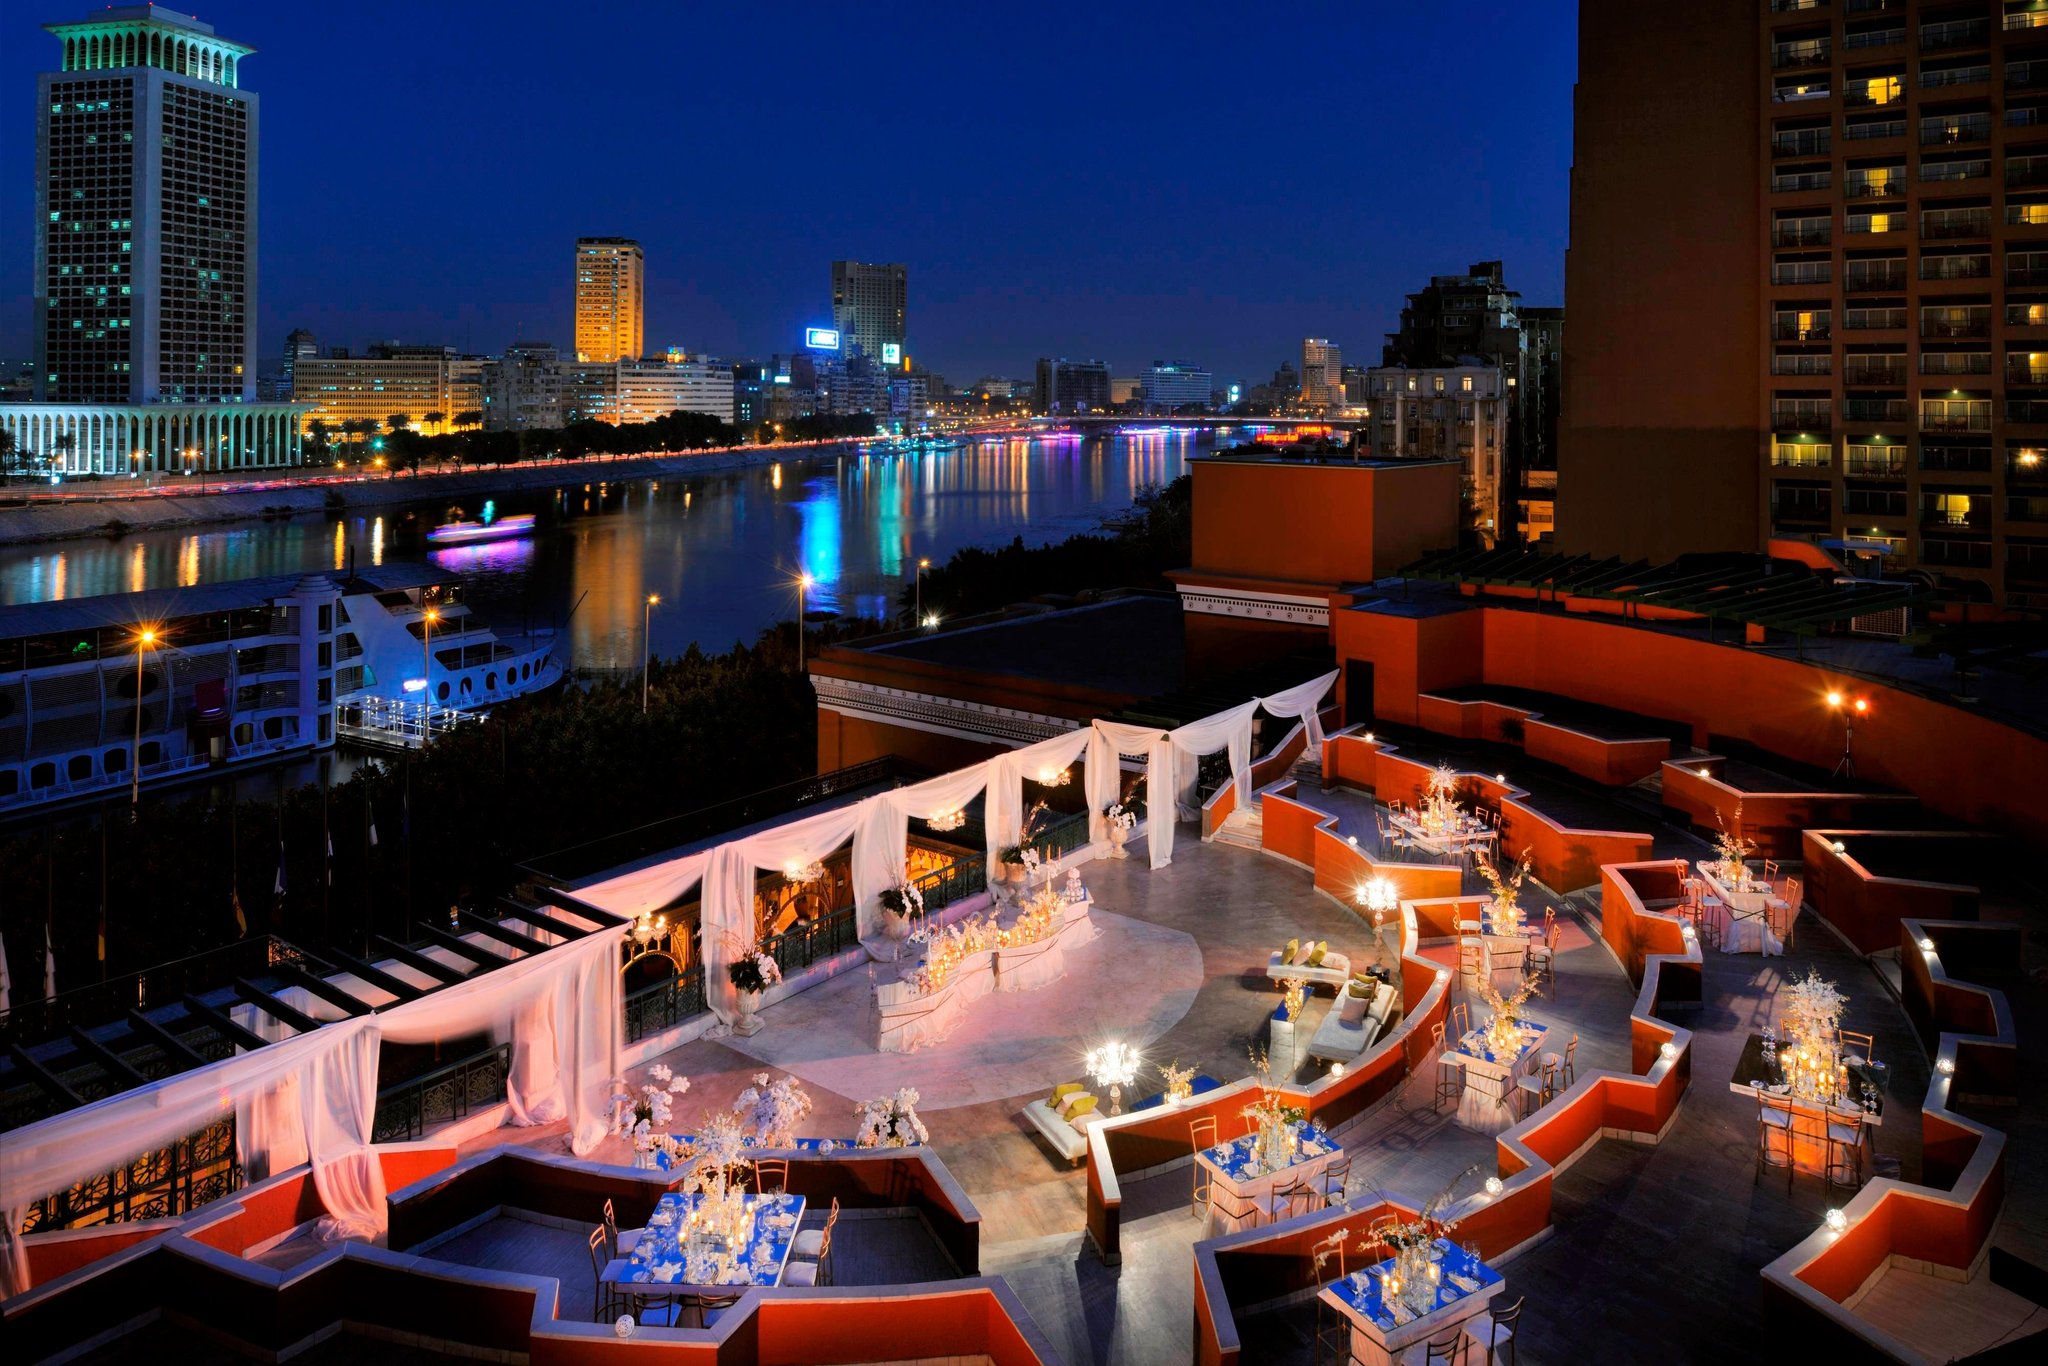 Cairo Marriott Hotel and Casino with a luxurious pool area and lush garden surroundings